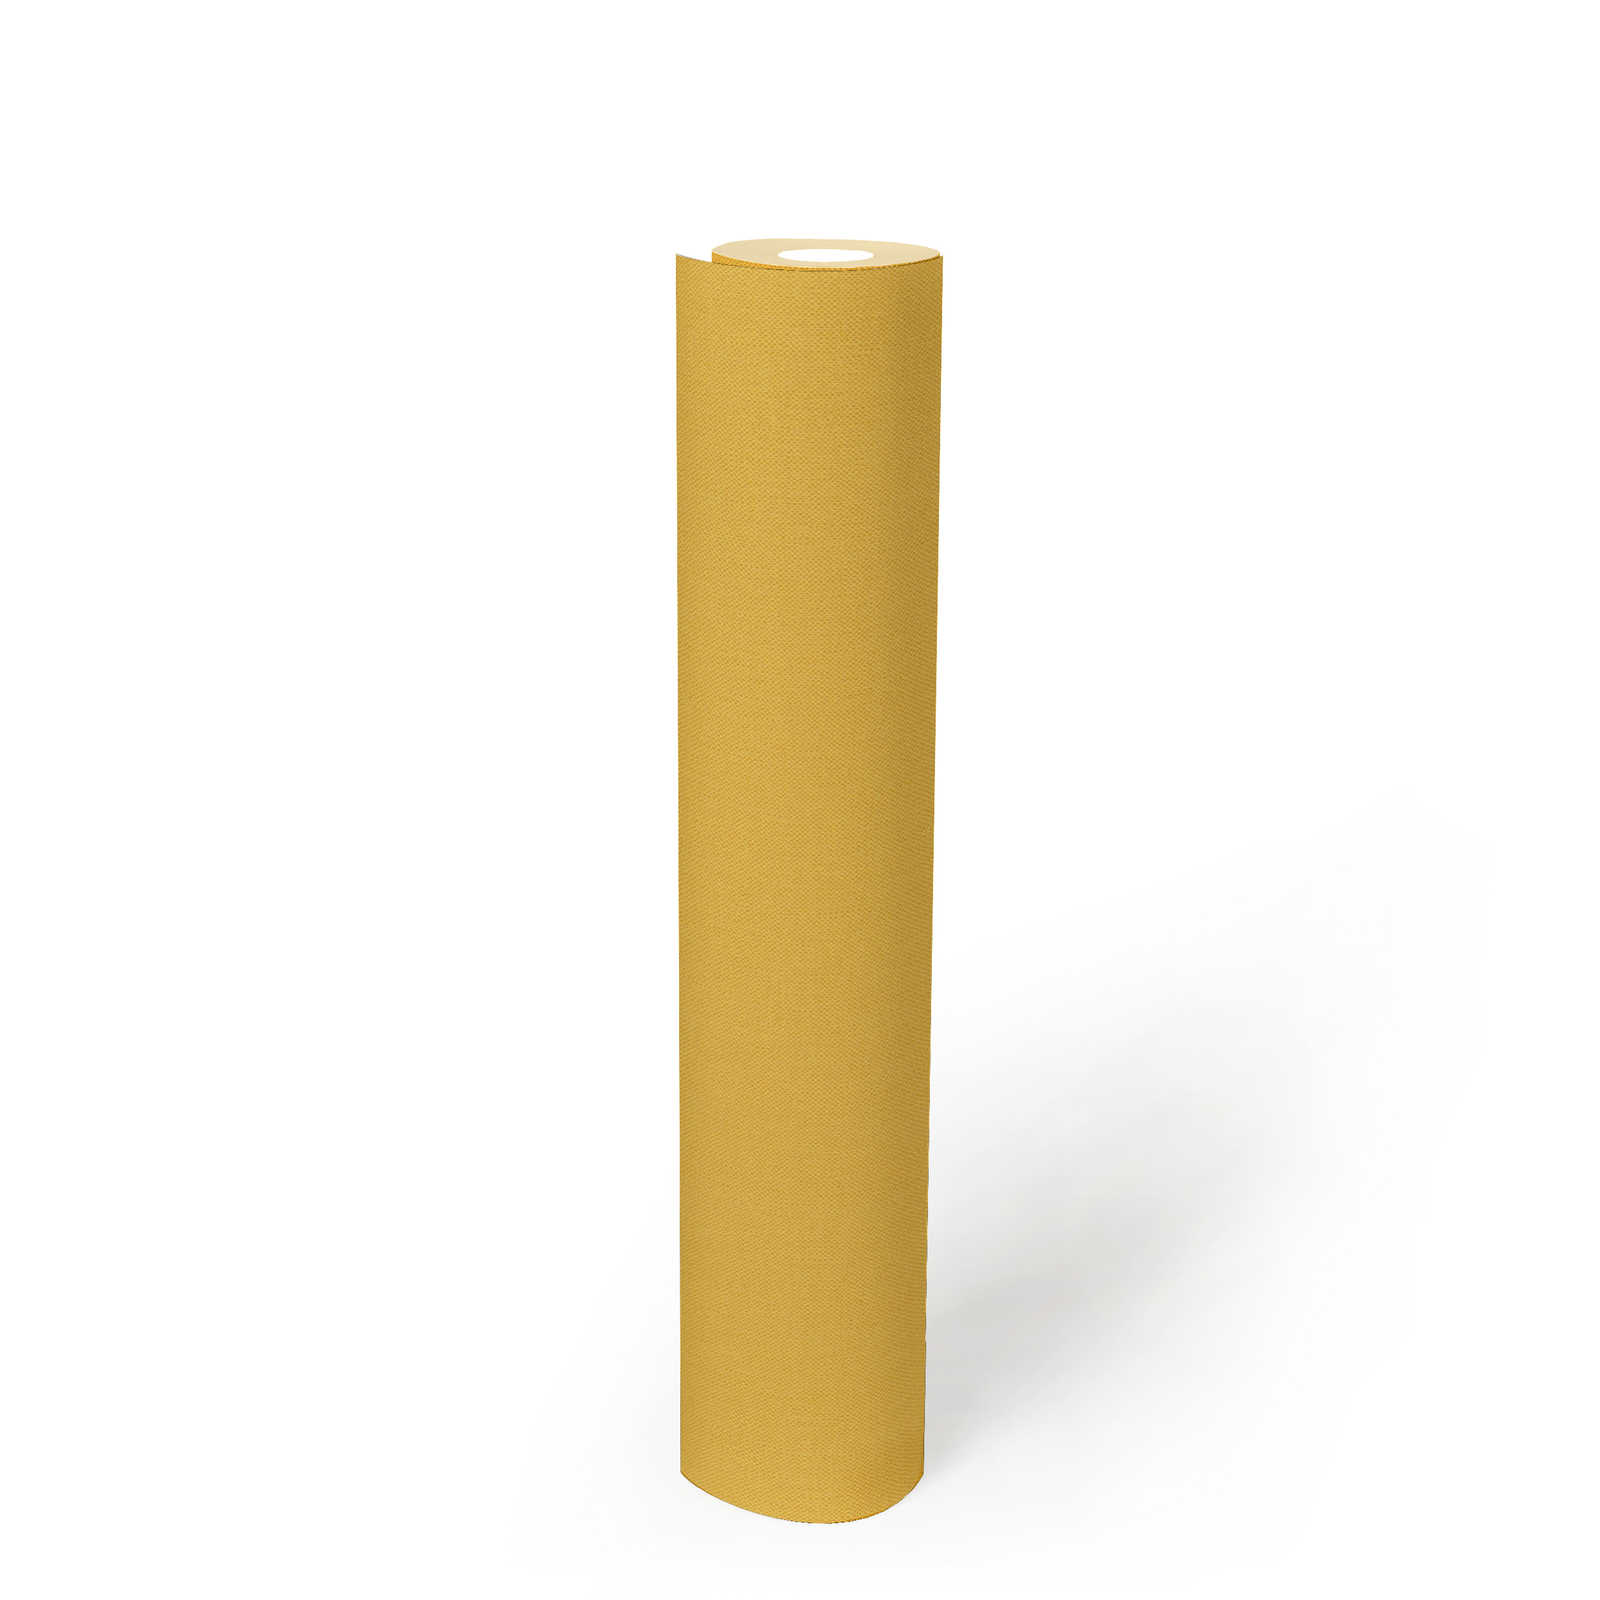             Wallpaper mustard yellow plain with textile texture - yellow
        